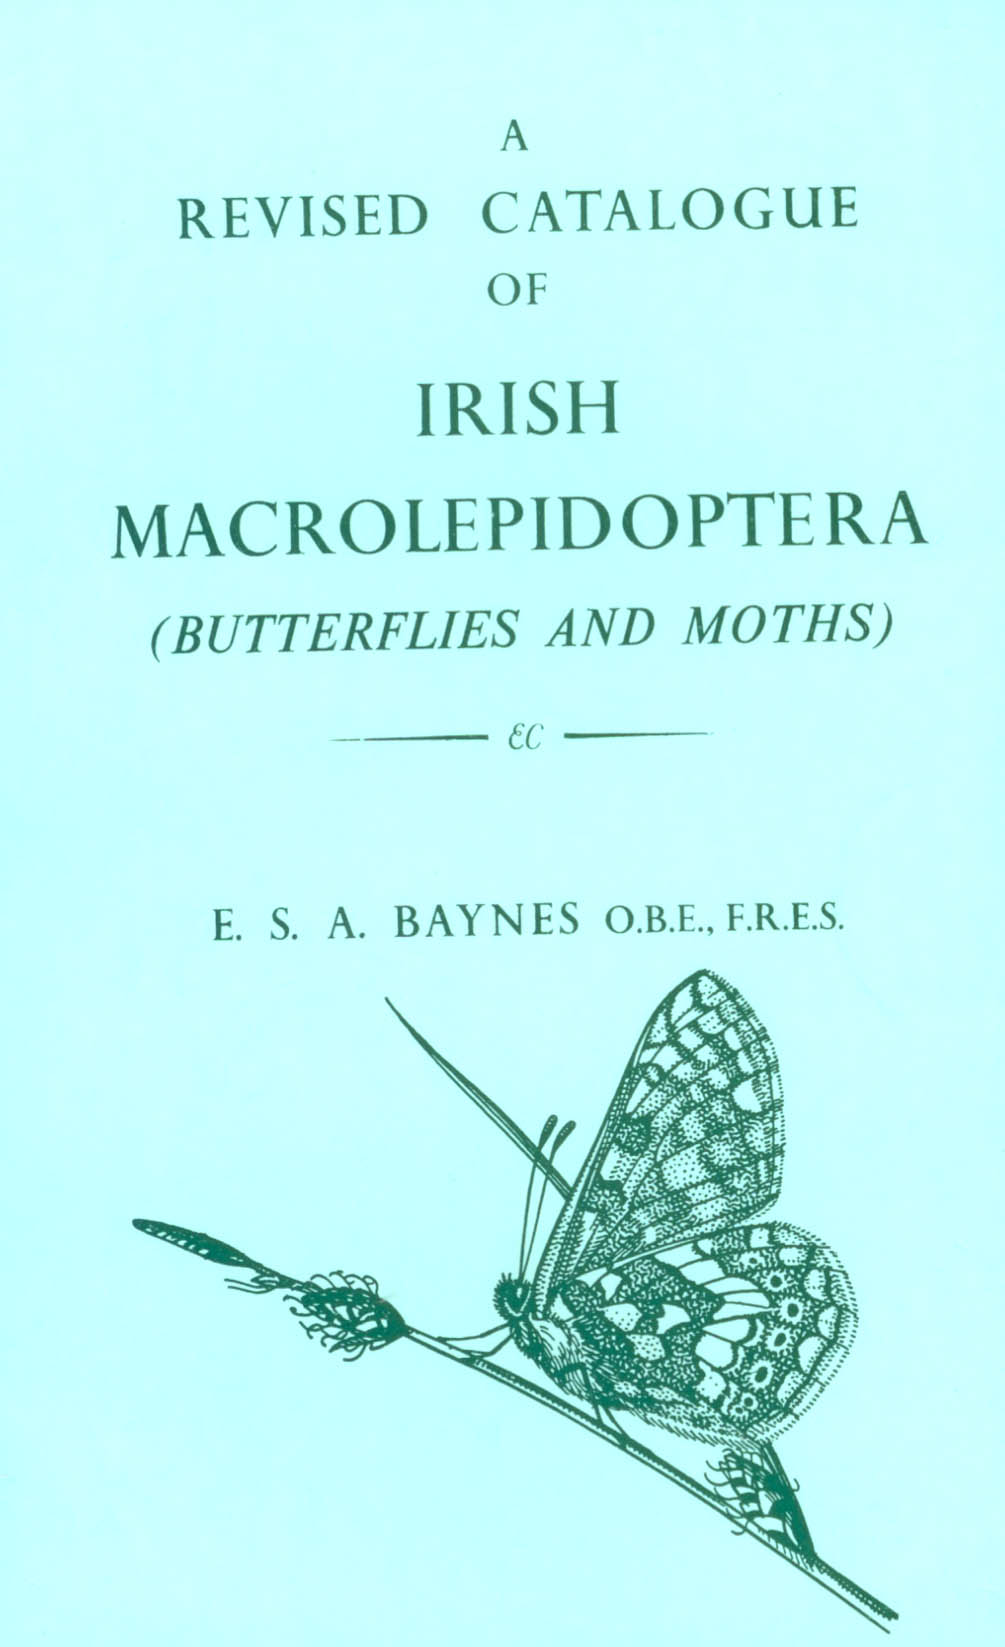 Baynes, E.S.A. - A Revised Catalogue of Irish Macrolepidoptera (Butterflies and Moths)